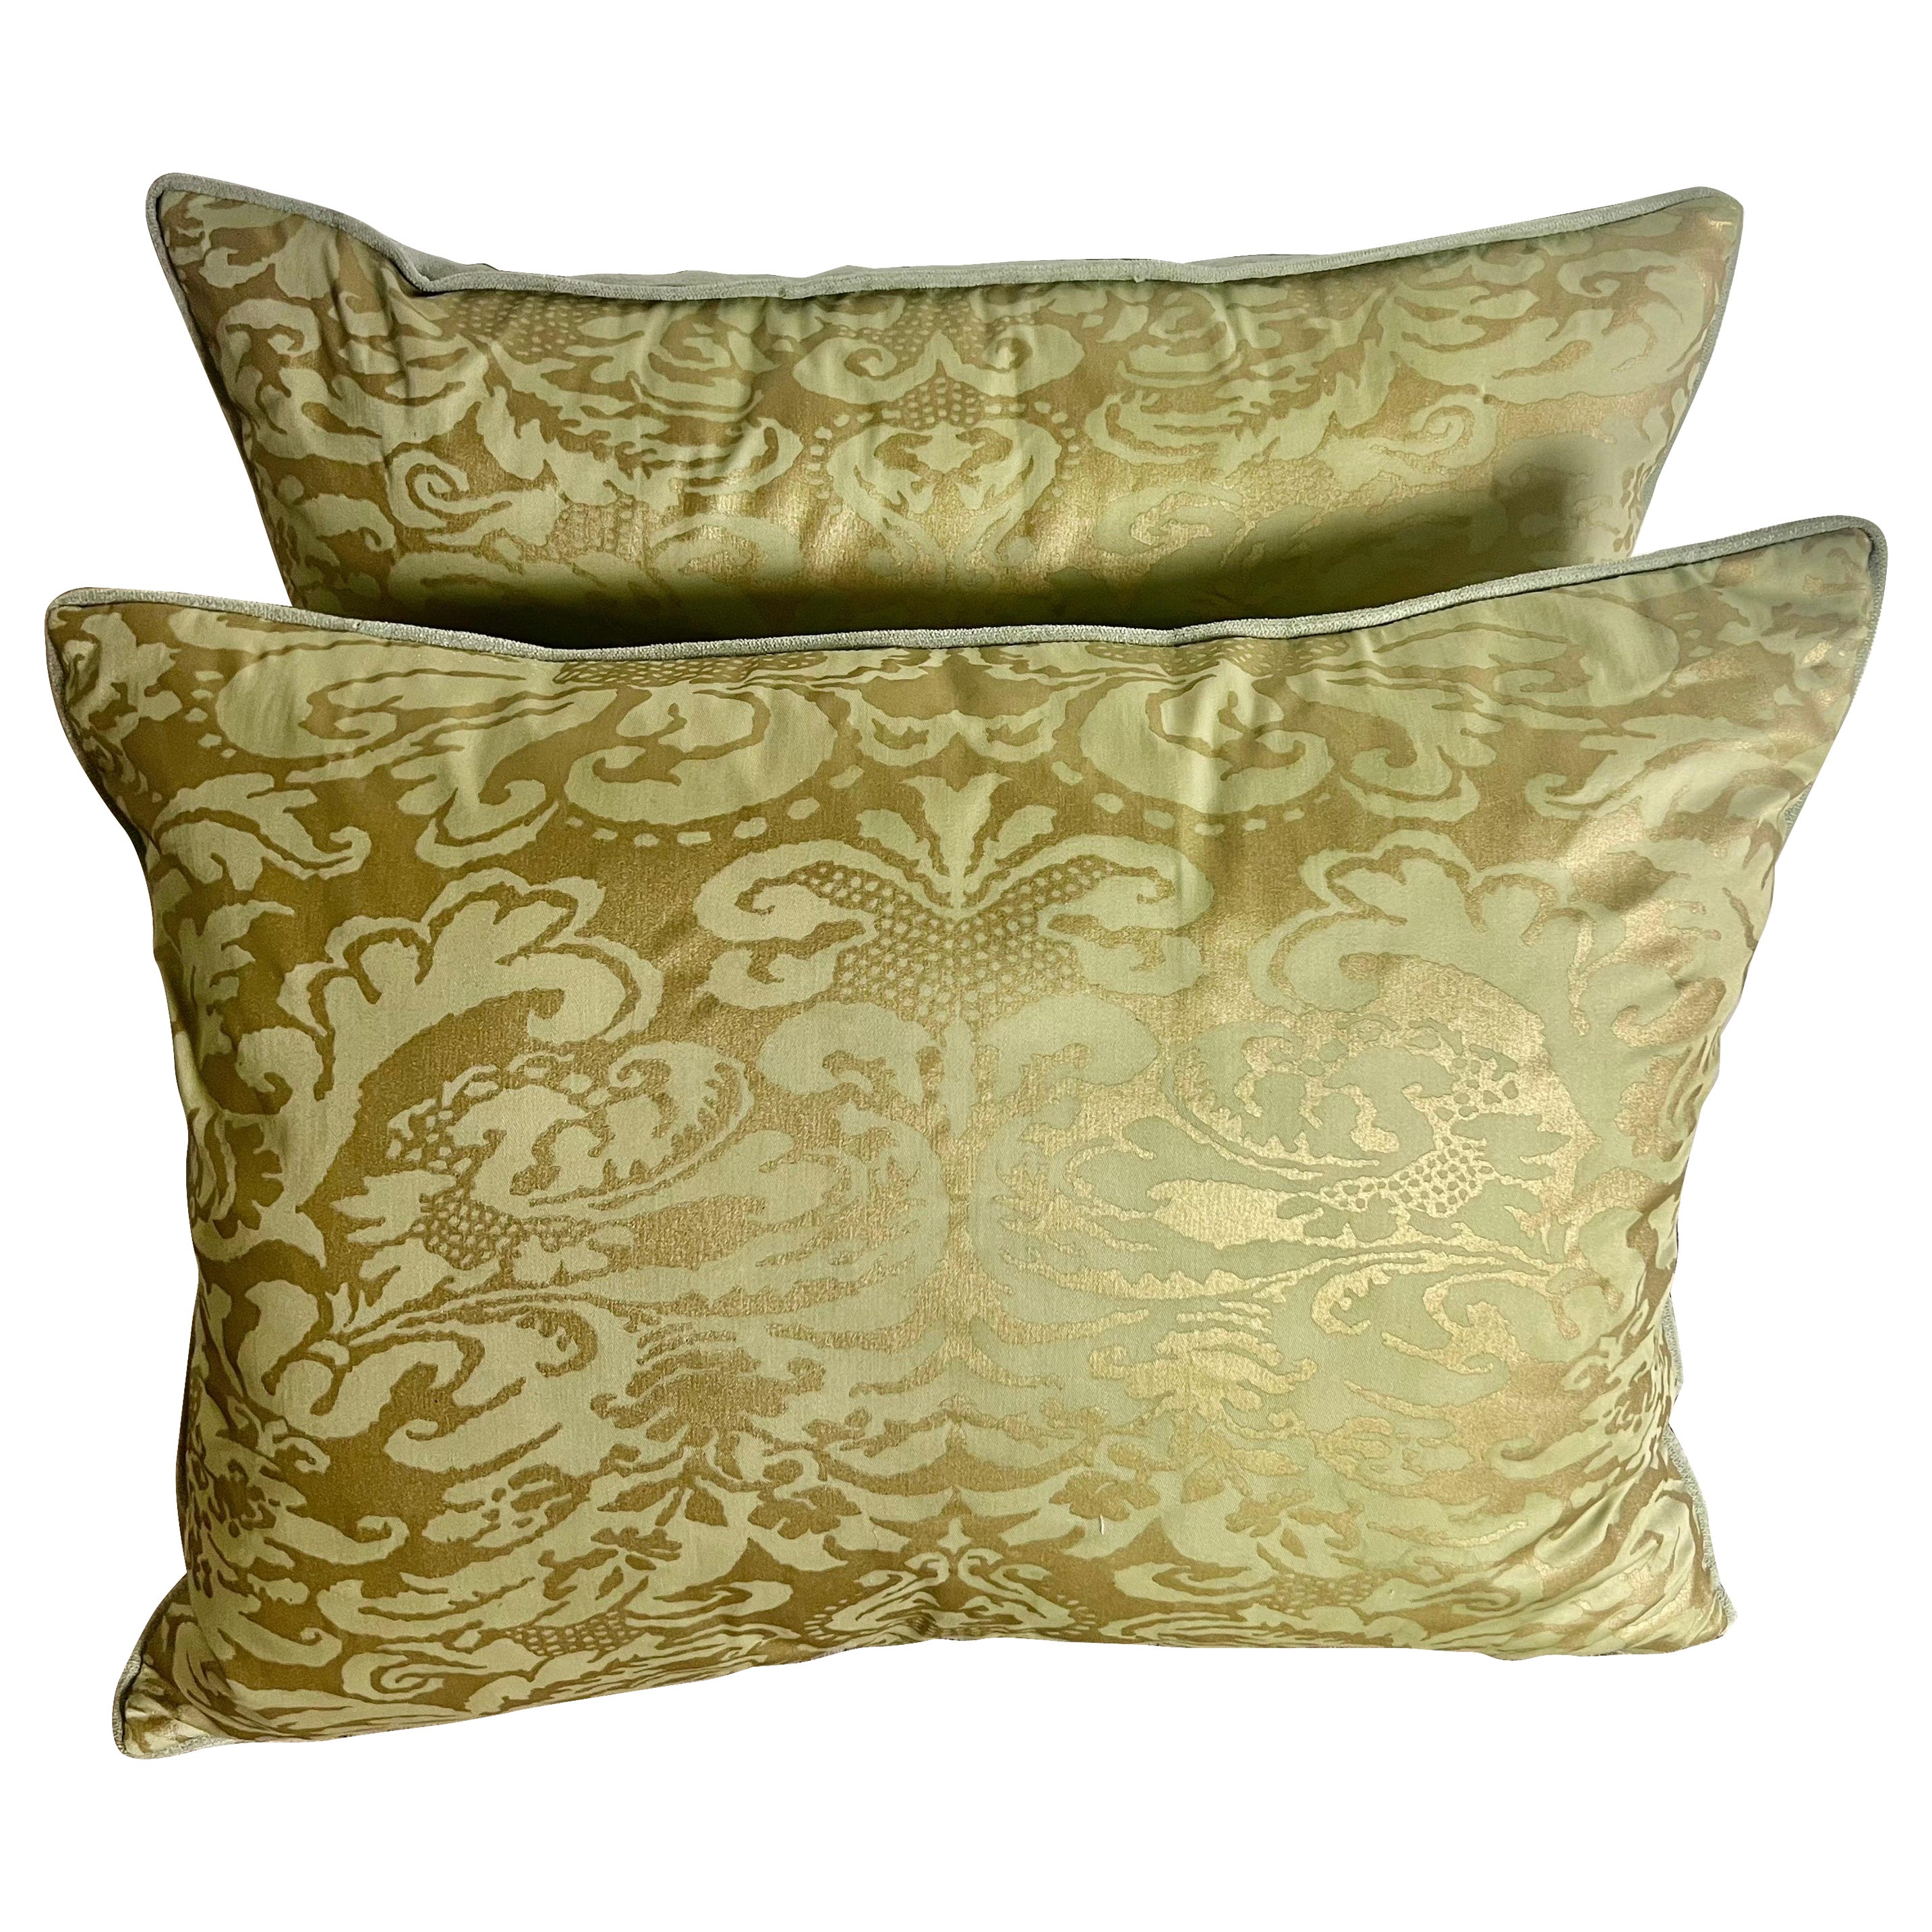 Pair of Fortuny Gold & Soft Green Pillows 